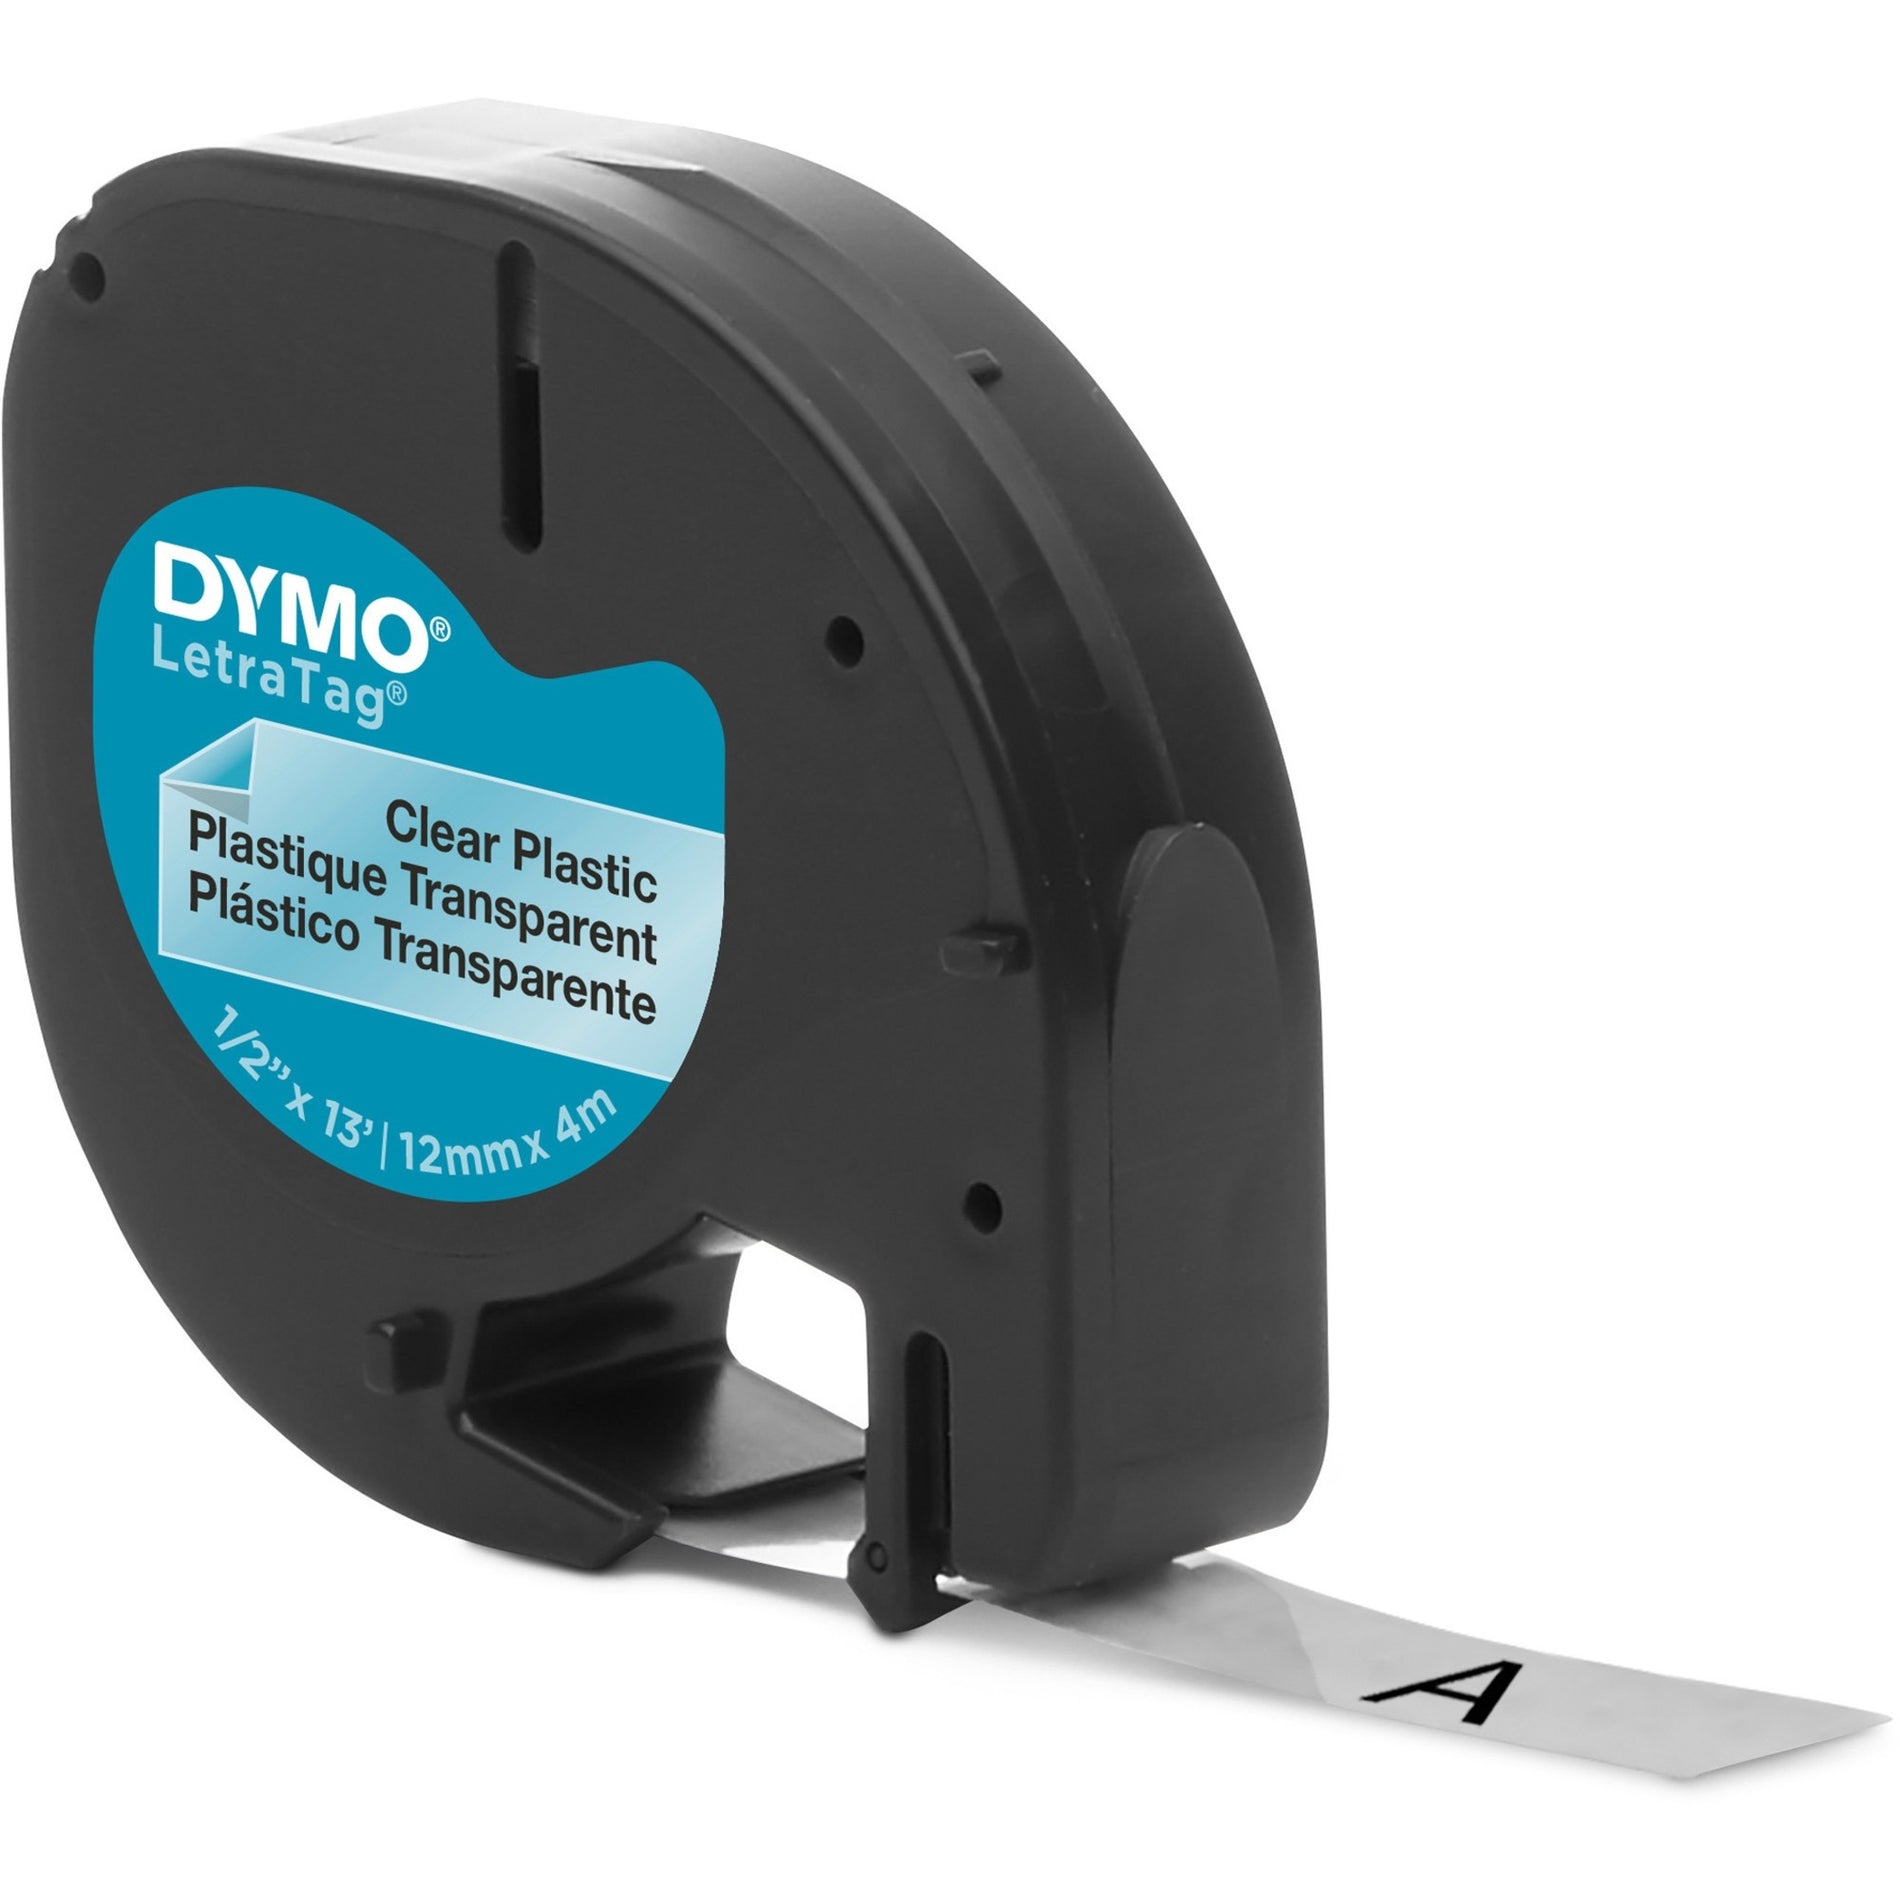 Dymo 16952 Letra Tag Labelmaker Tapes, 1/2"x13', Black on Clear